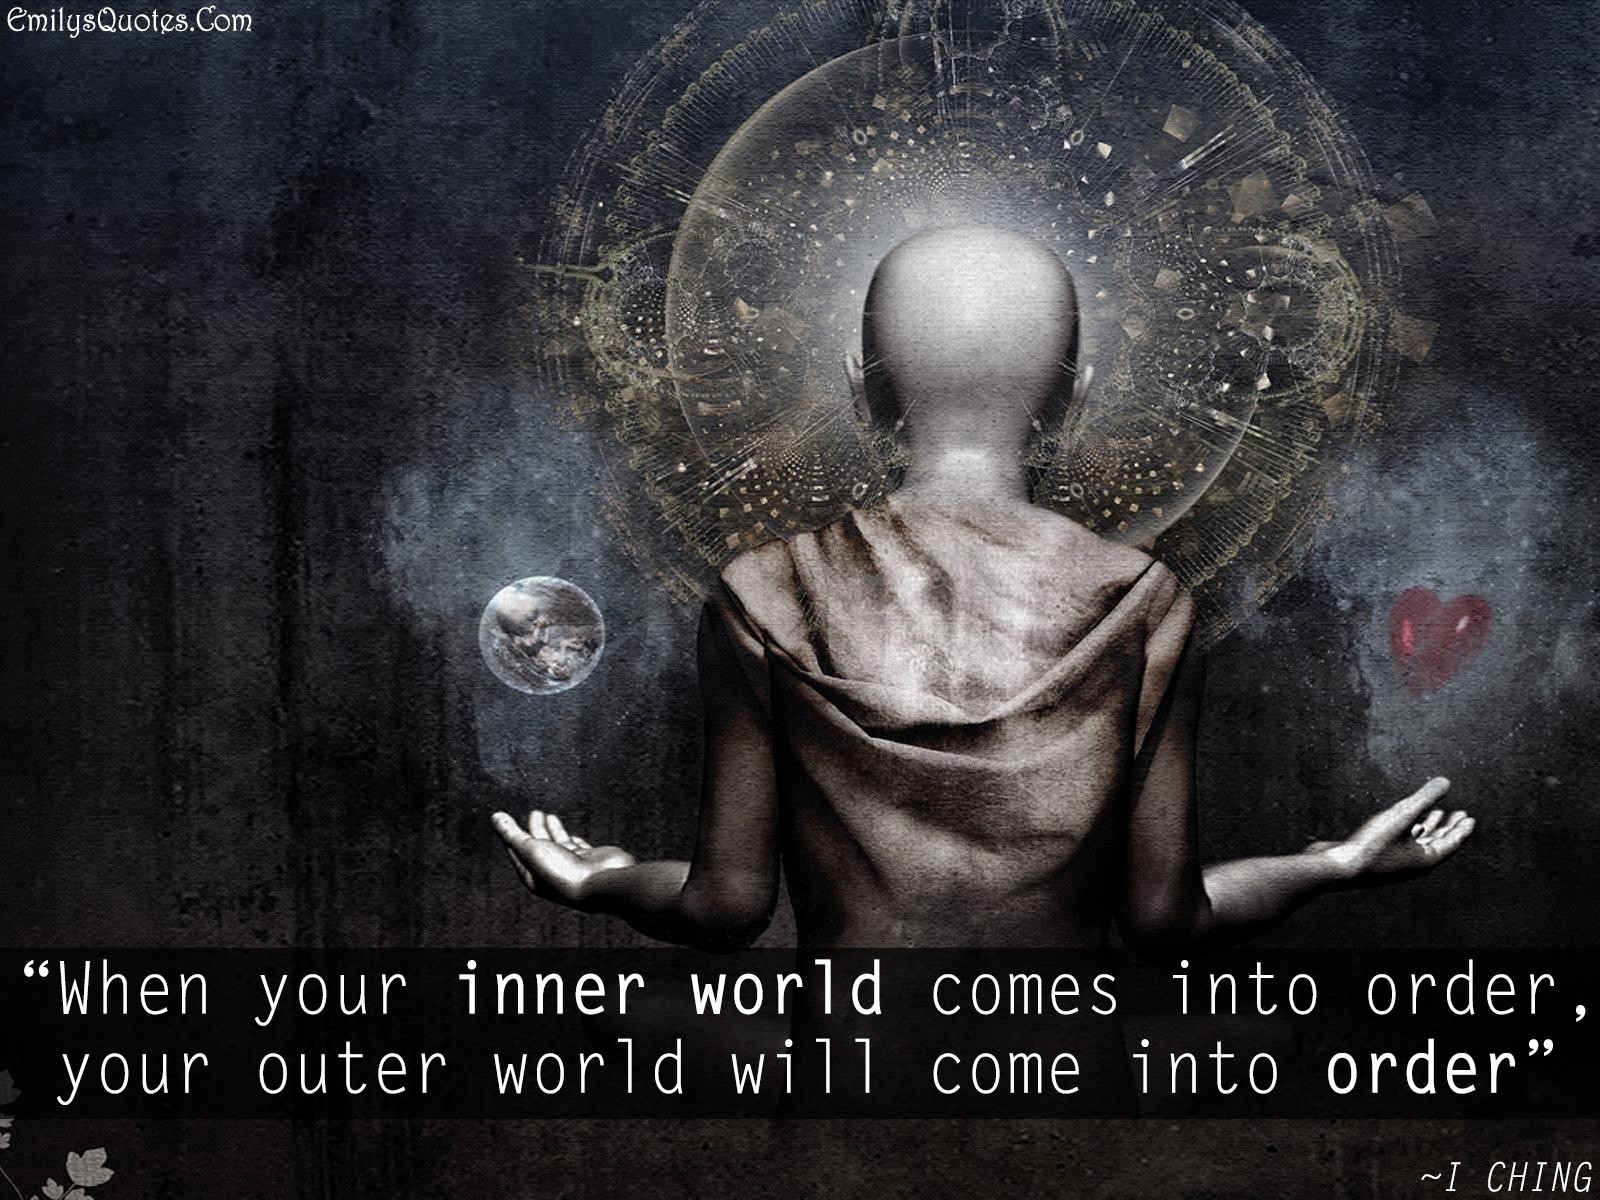 When your inner world comes into order, your outer world will come into order